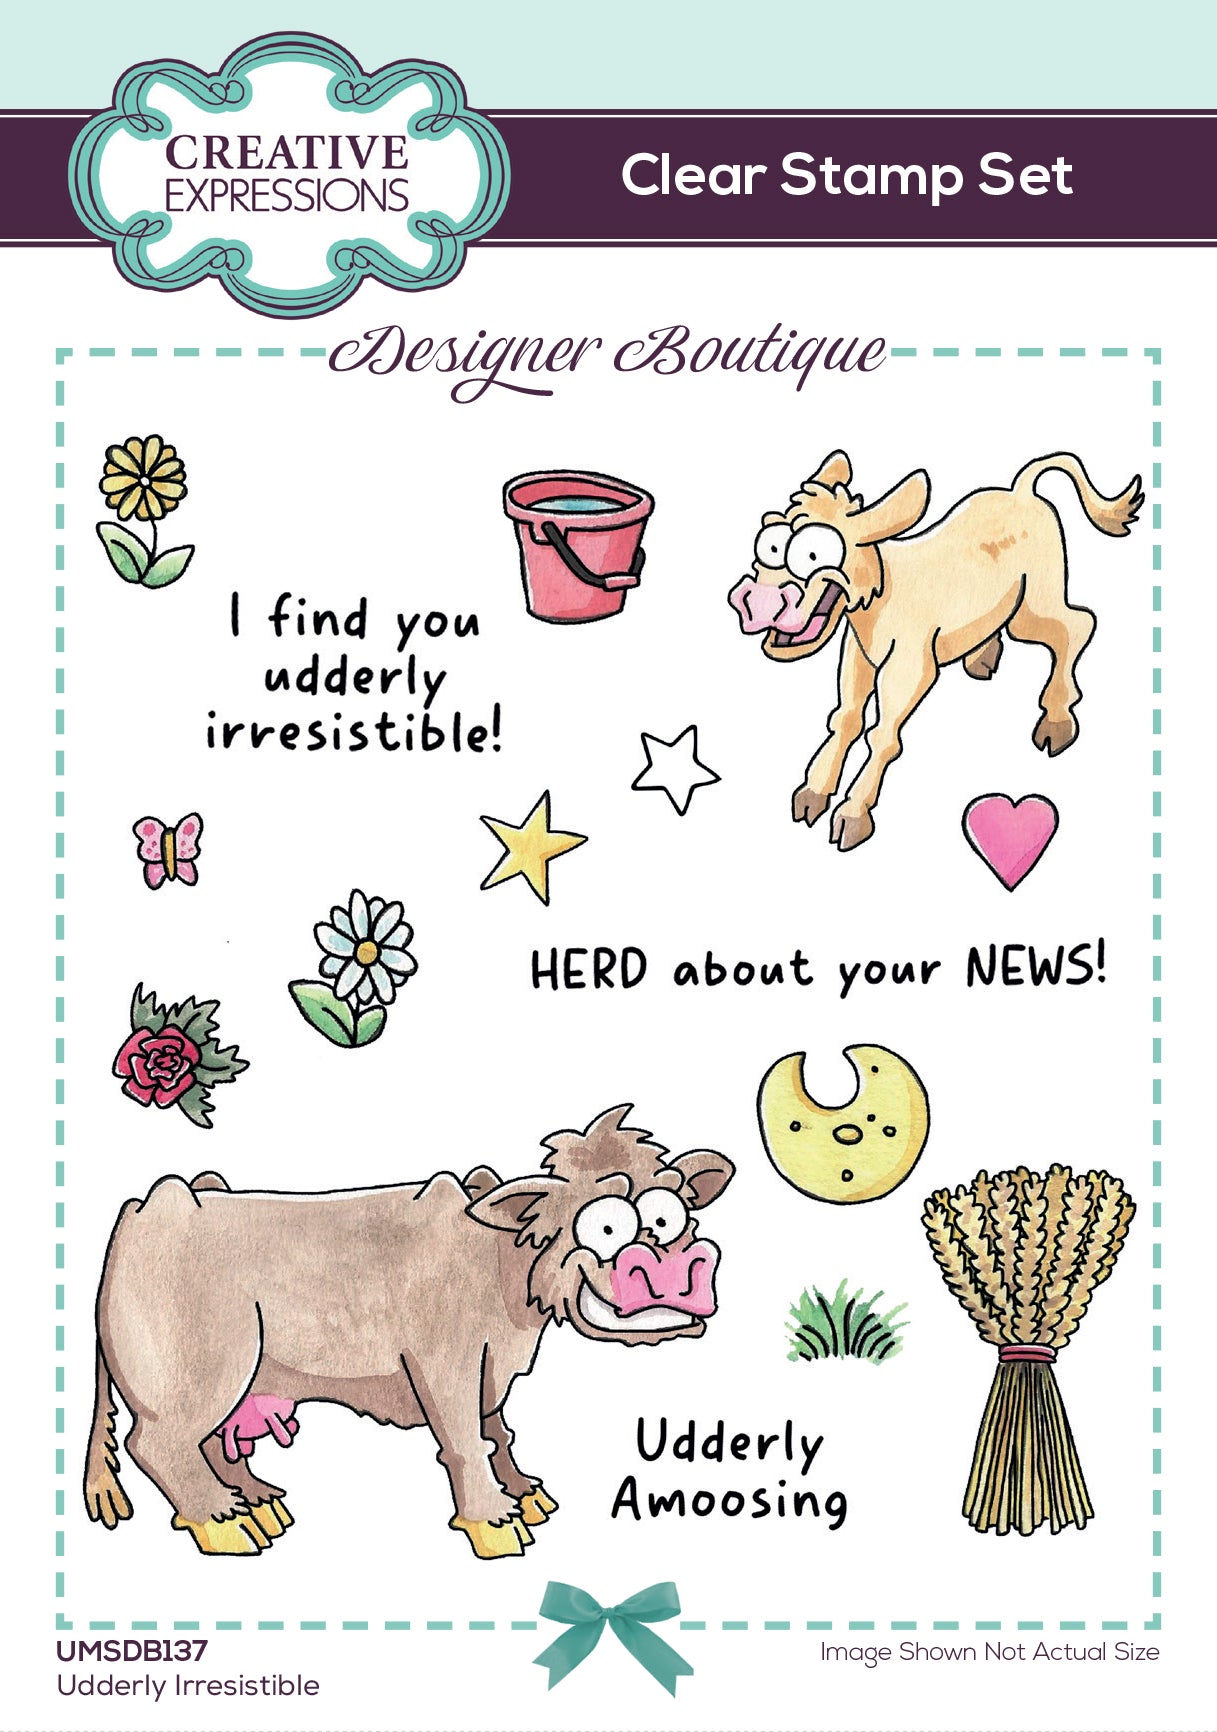 Creative Expressions Udderly IrresistIble 6 in x 4 in Clear Stamp Set